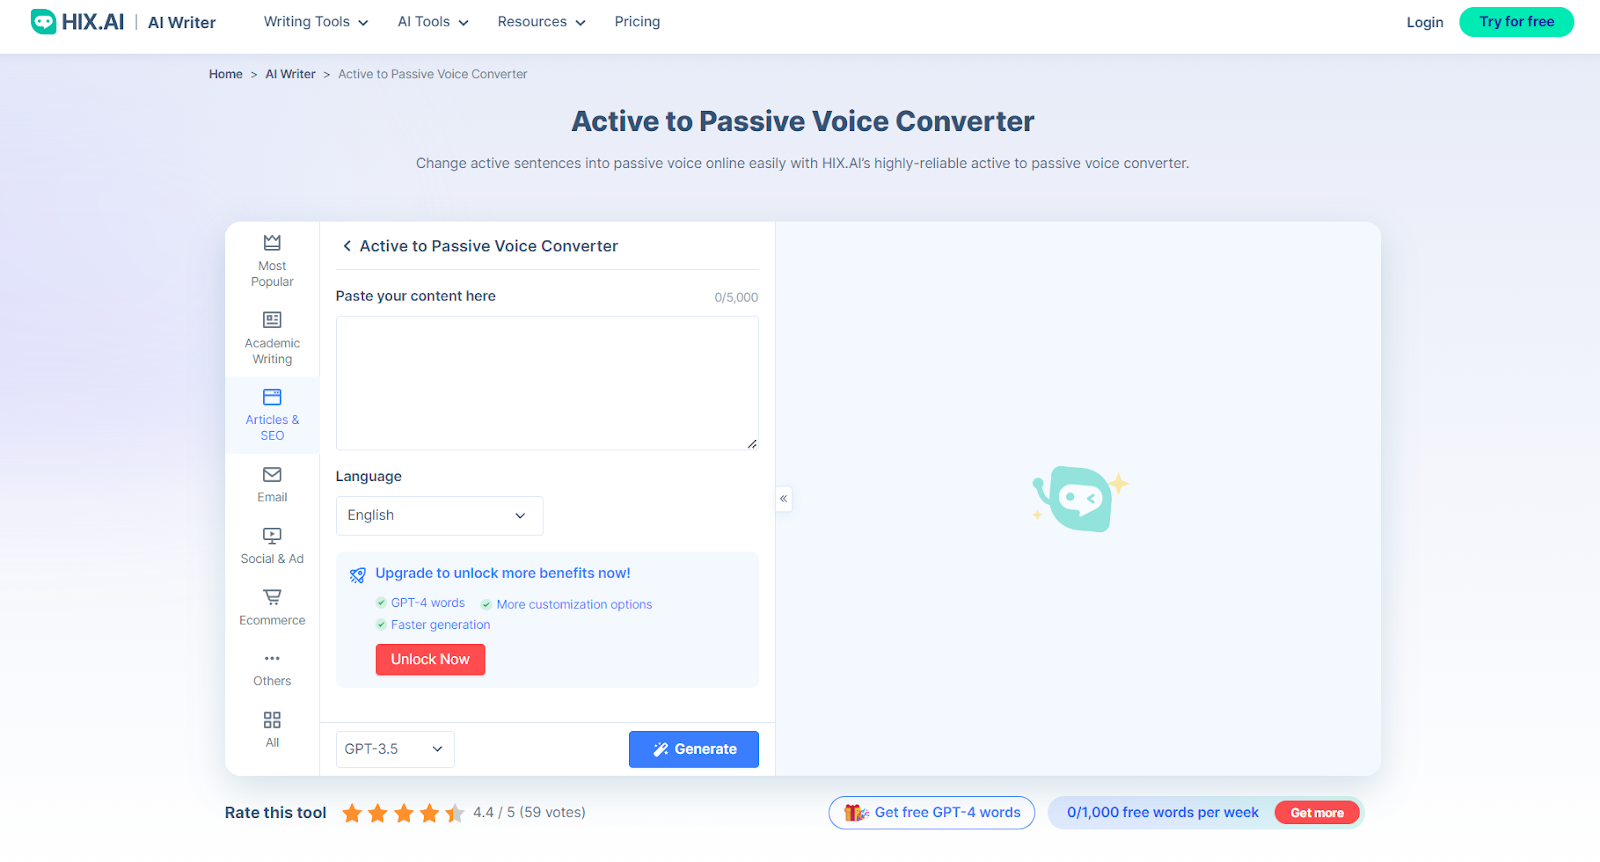 How to Change Active Voice to Passive Voice with HIX AI Writer?